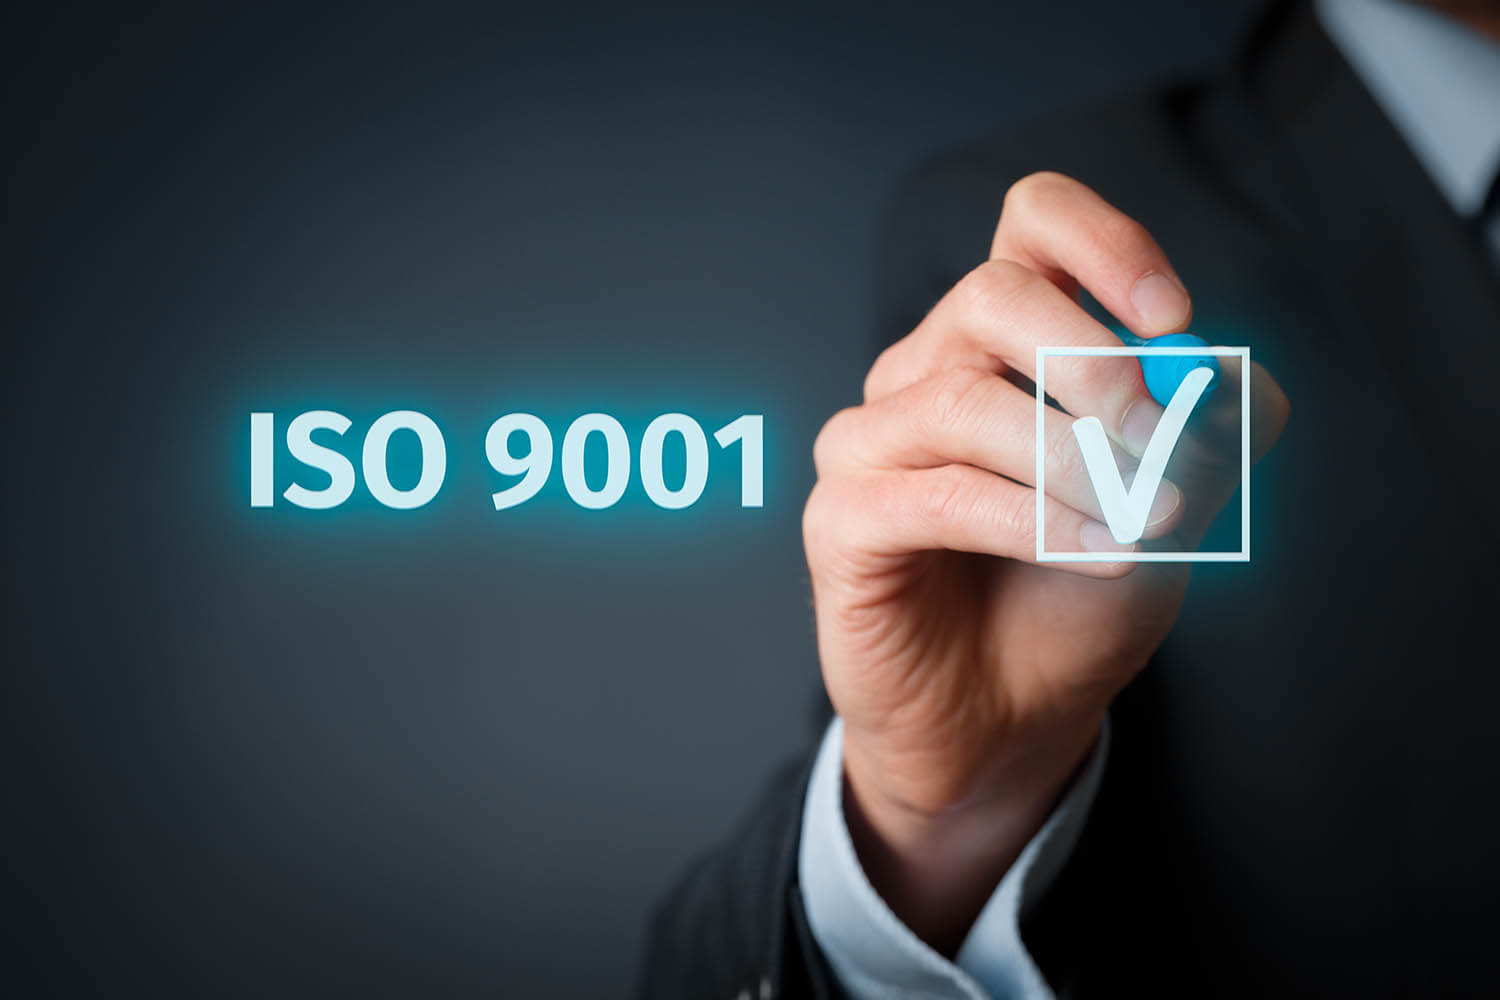 Guide to know about iso 9001 singapore